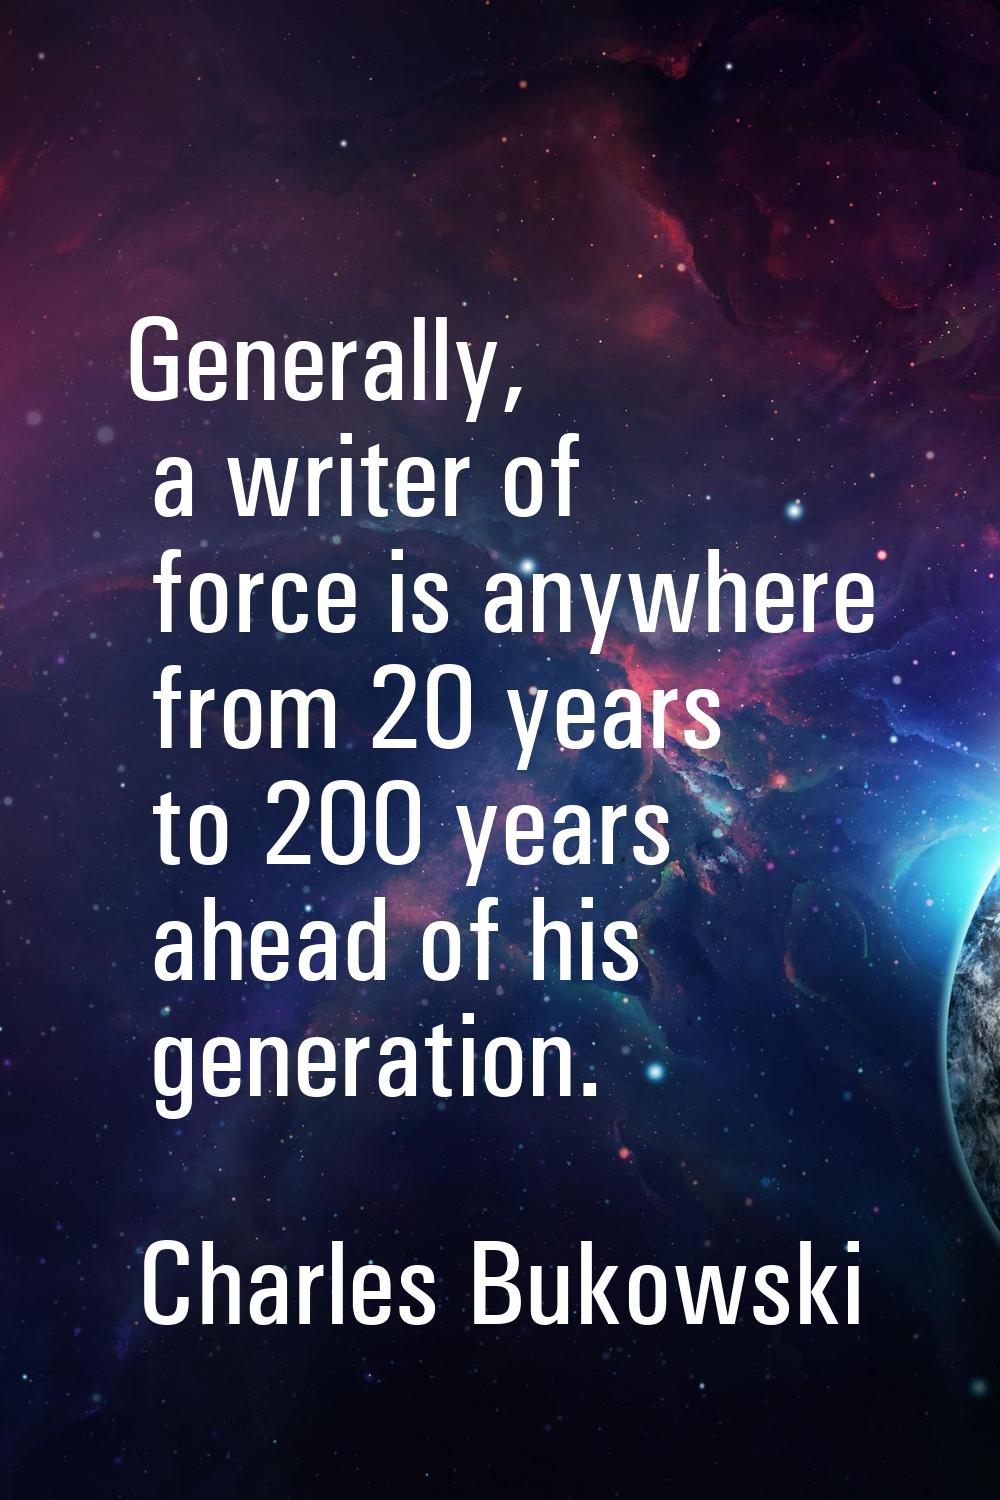 Generally, a writer of force is anywhere from 20 years to 200 years ahead of his generation.